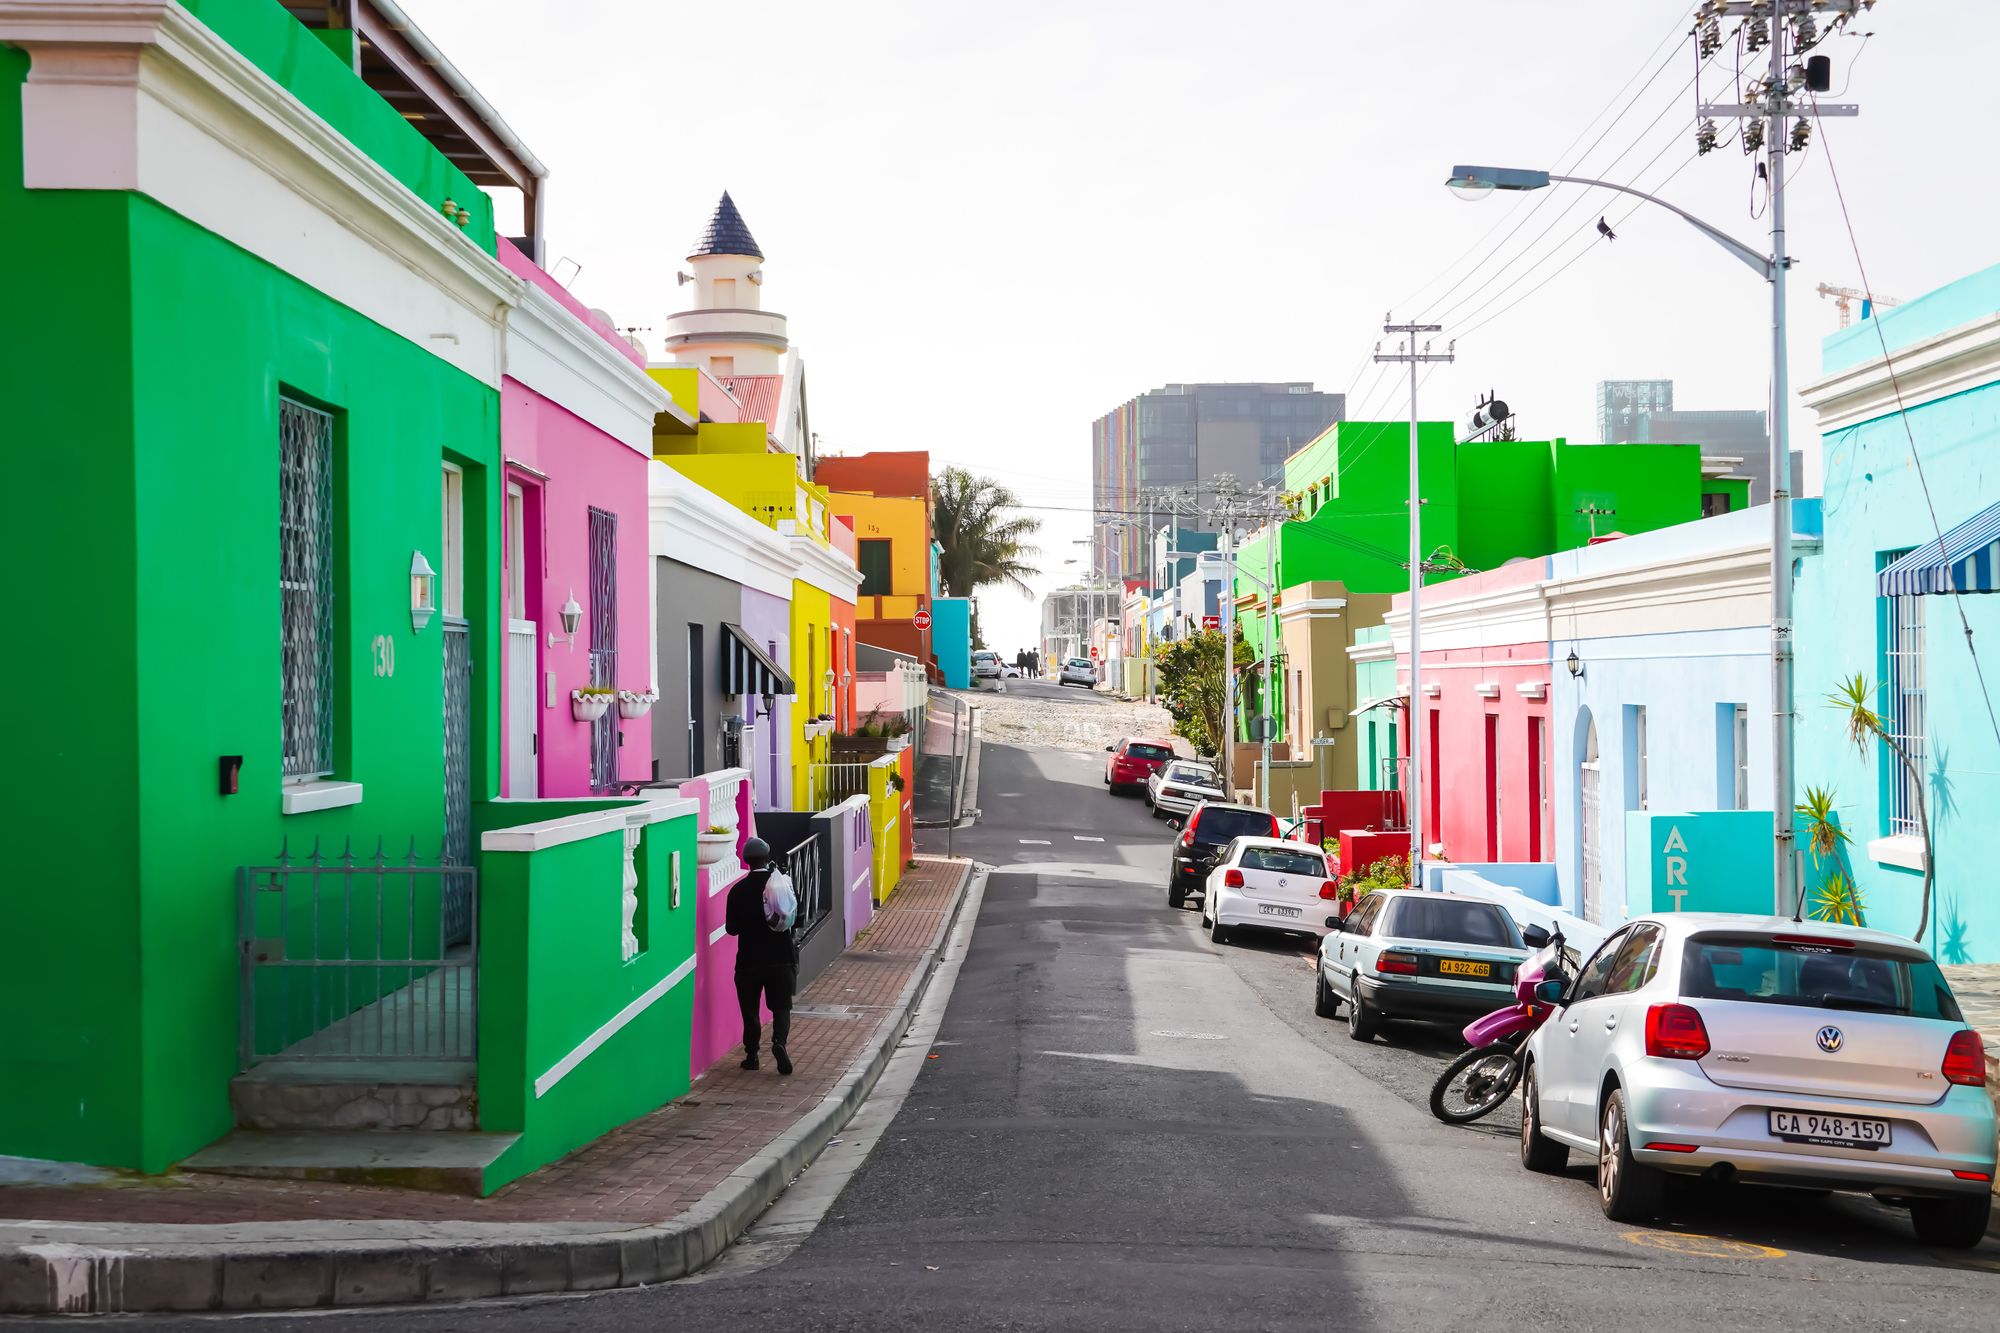 A colorful street corner in South Africa